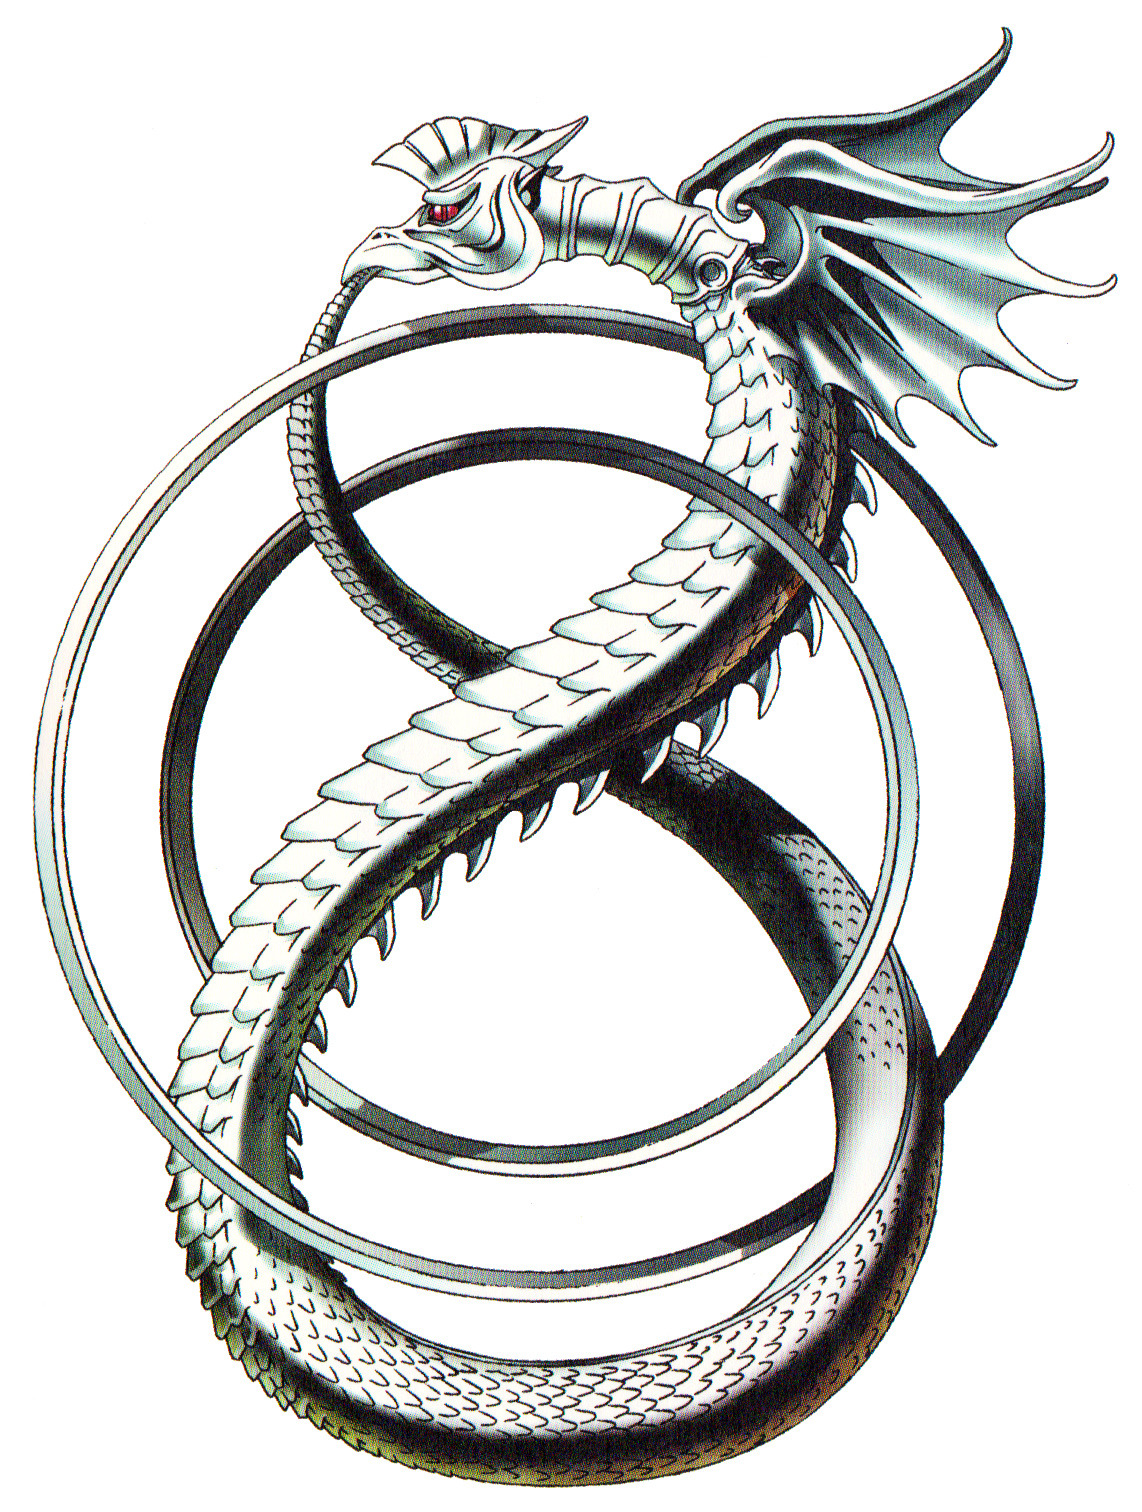 The Ouroboros, also known as Ophis or simply Ouroboros, is an ancient symbo...